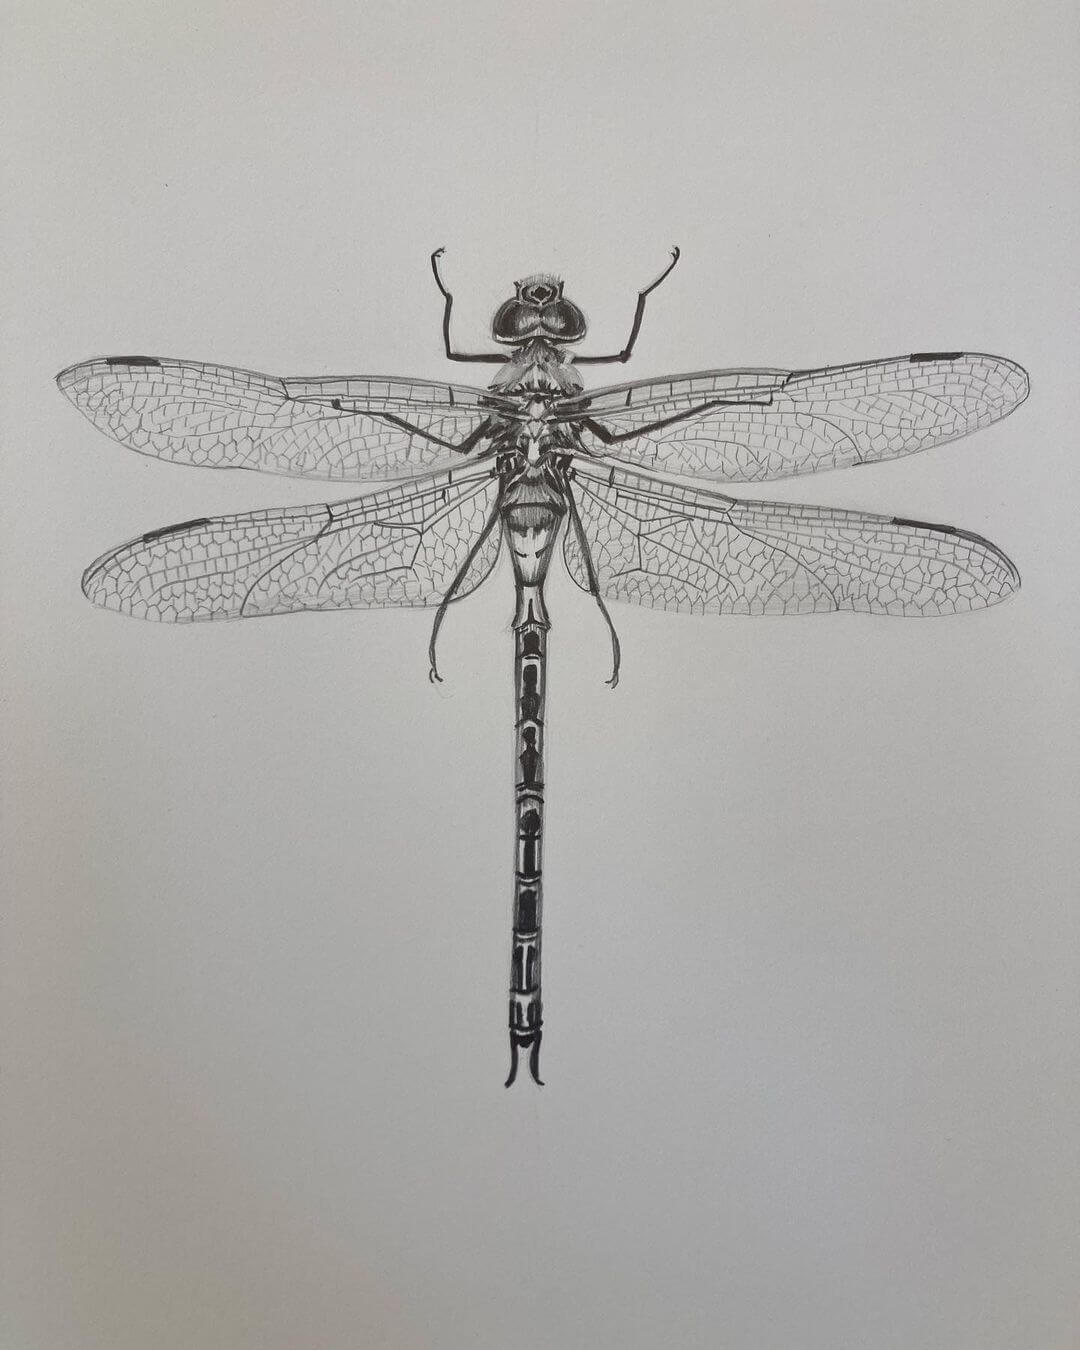 2. Realistic drawing of a dragon fly drawn on white paper using graphite pencil.